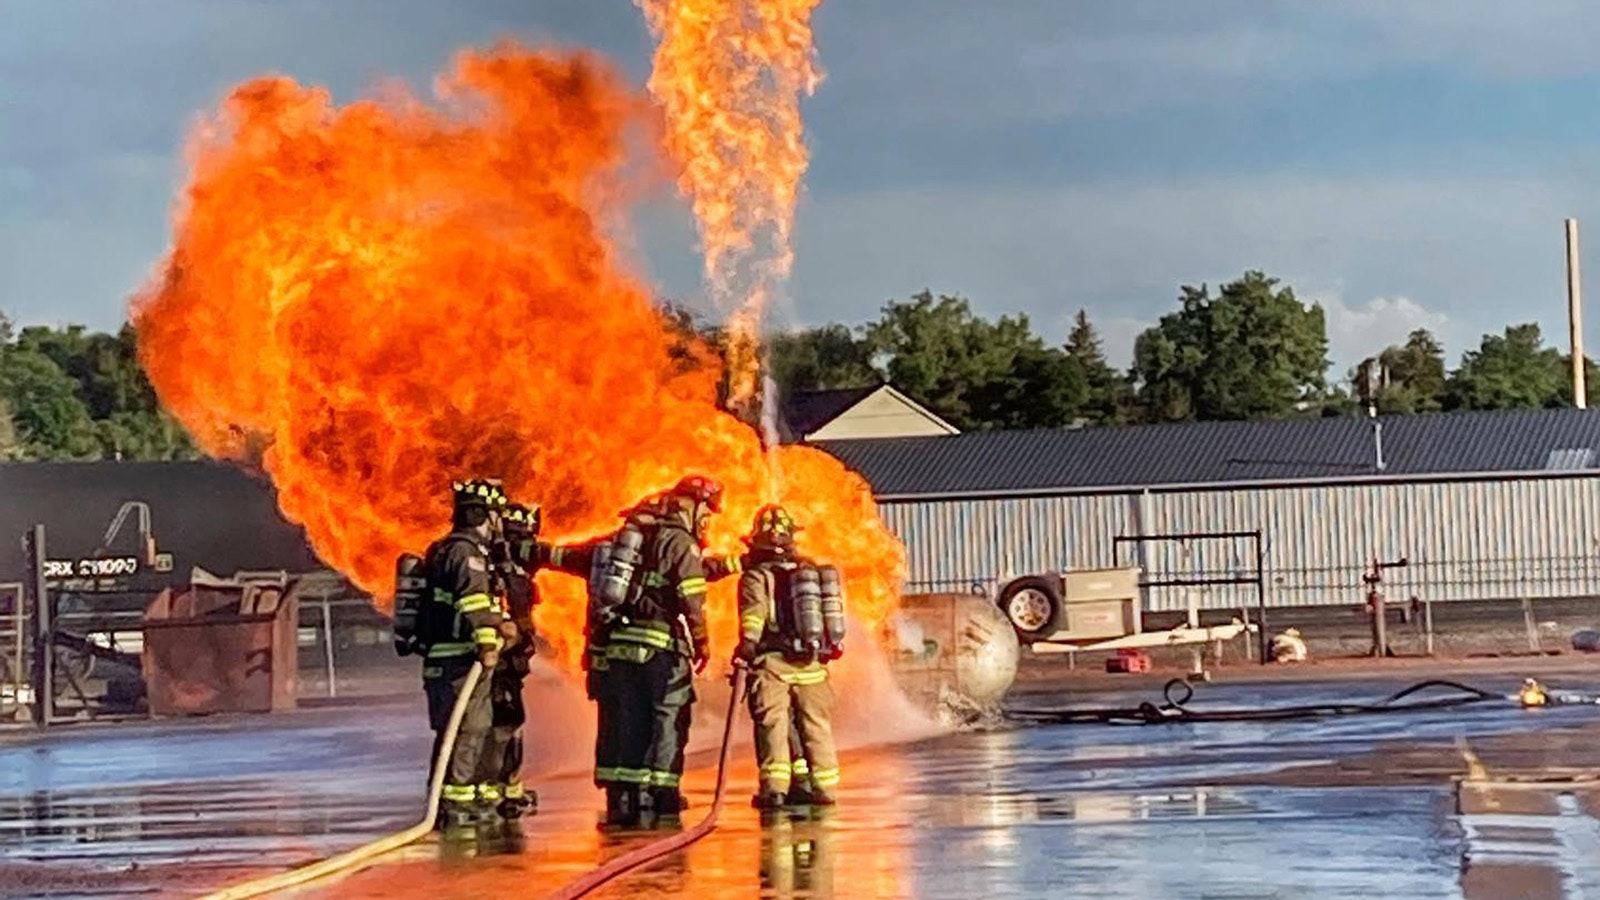 Firefighters train at the Campbell County Fire Department's training facility in Gillette.